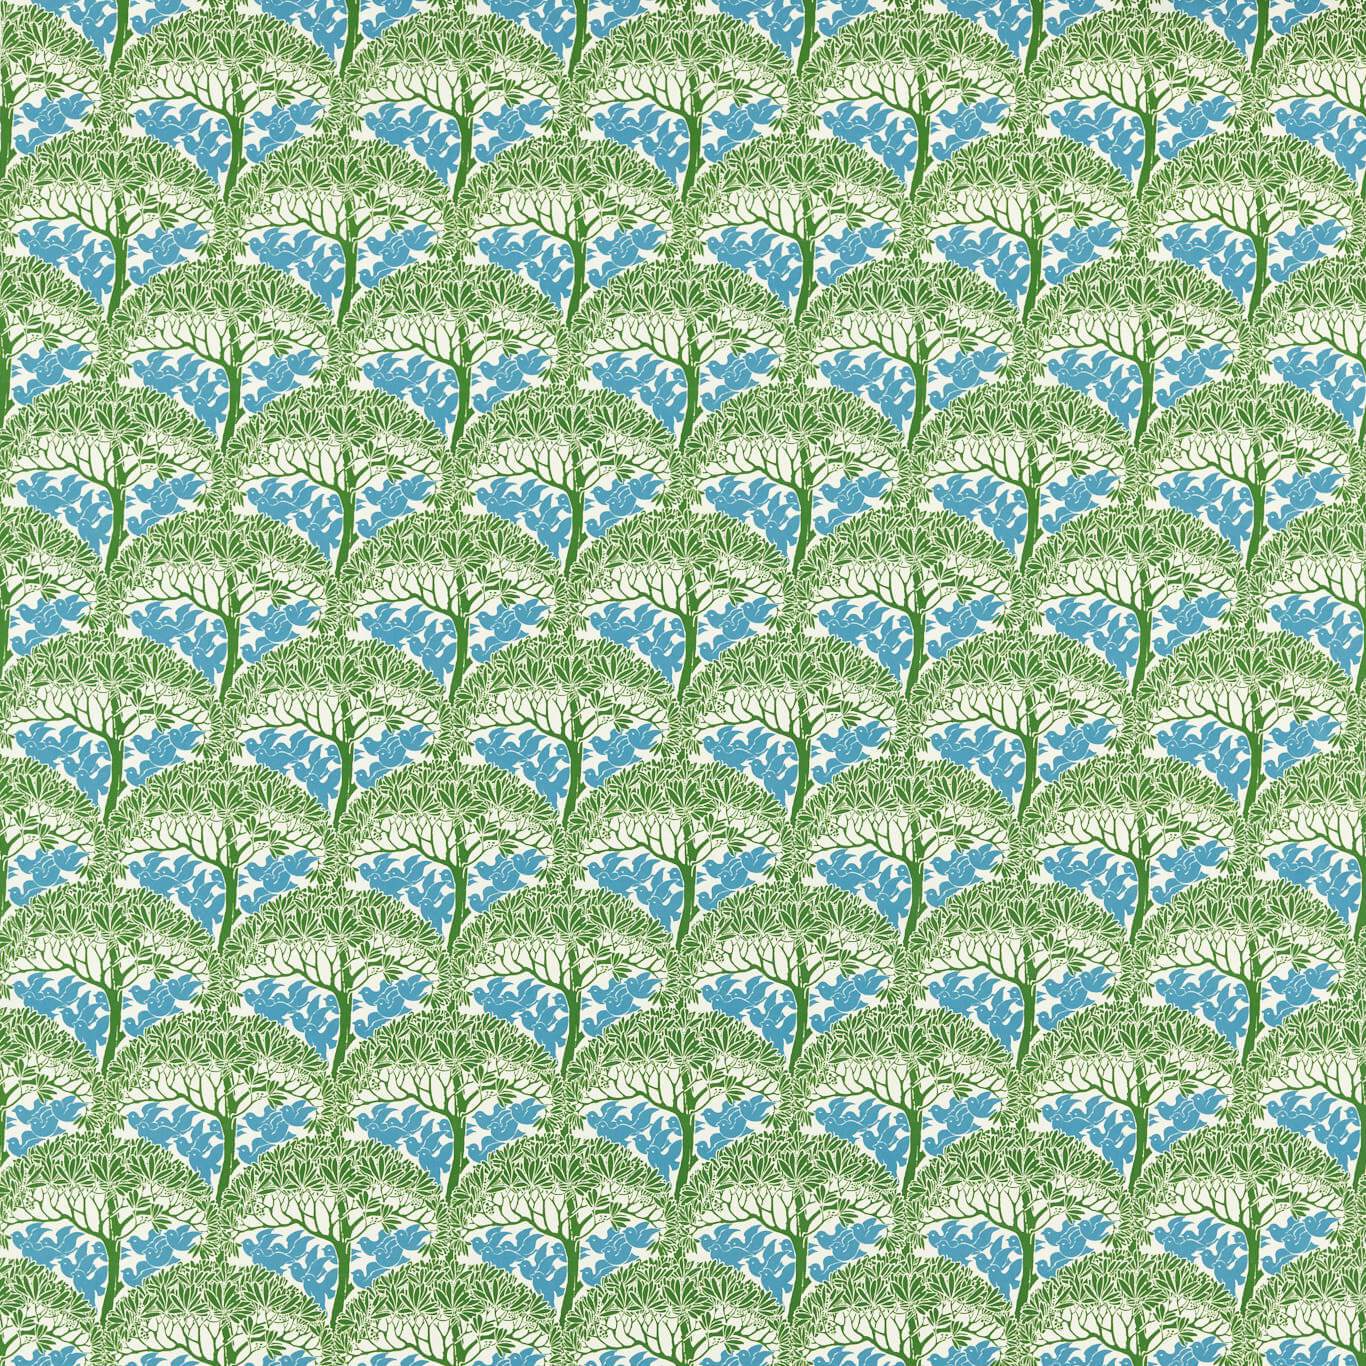 The Savaric Garden Green Fabric by MOR